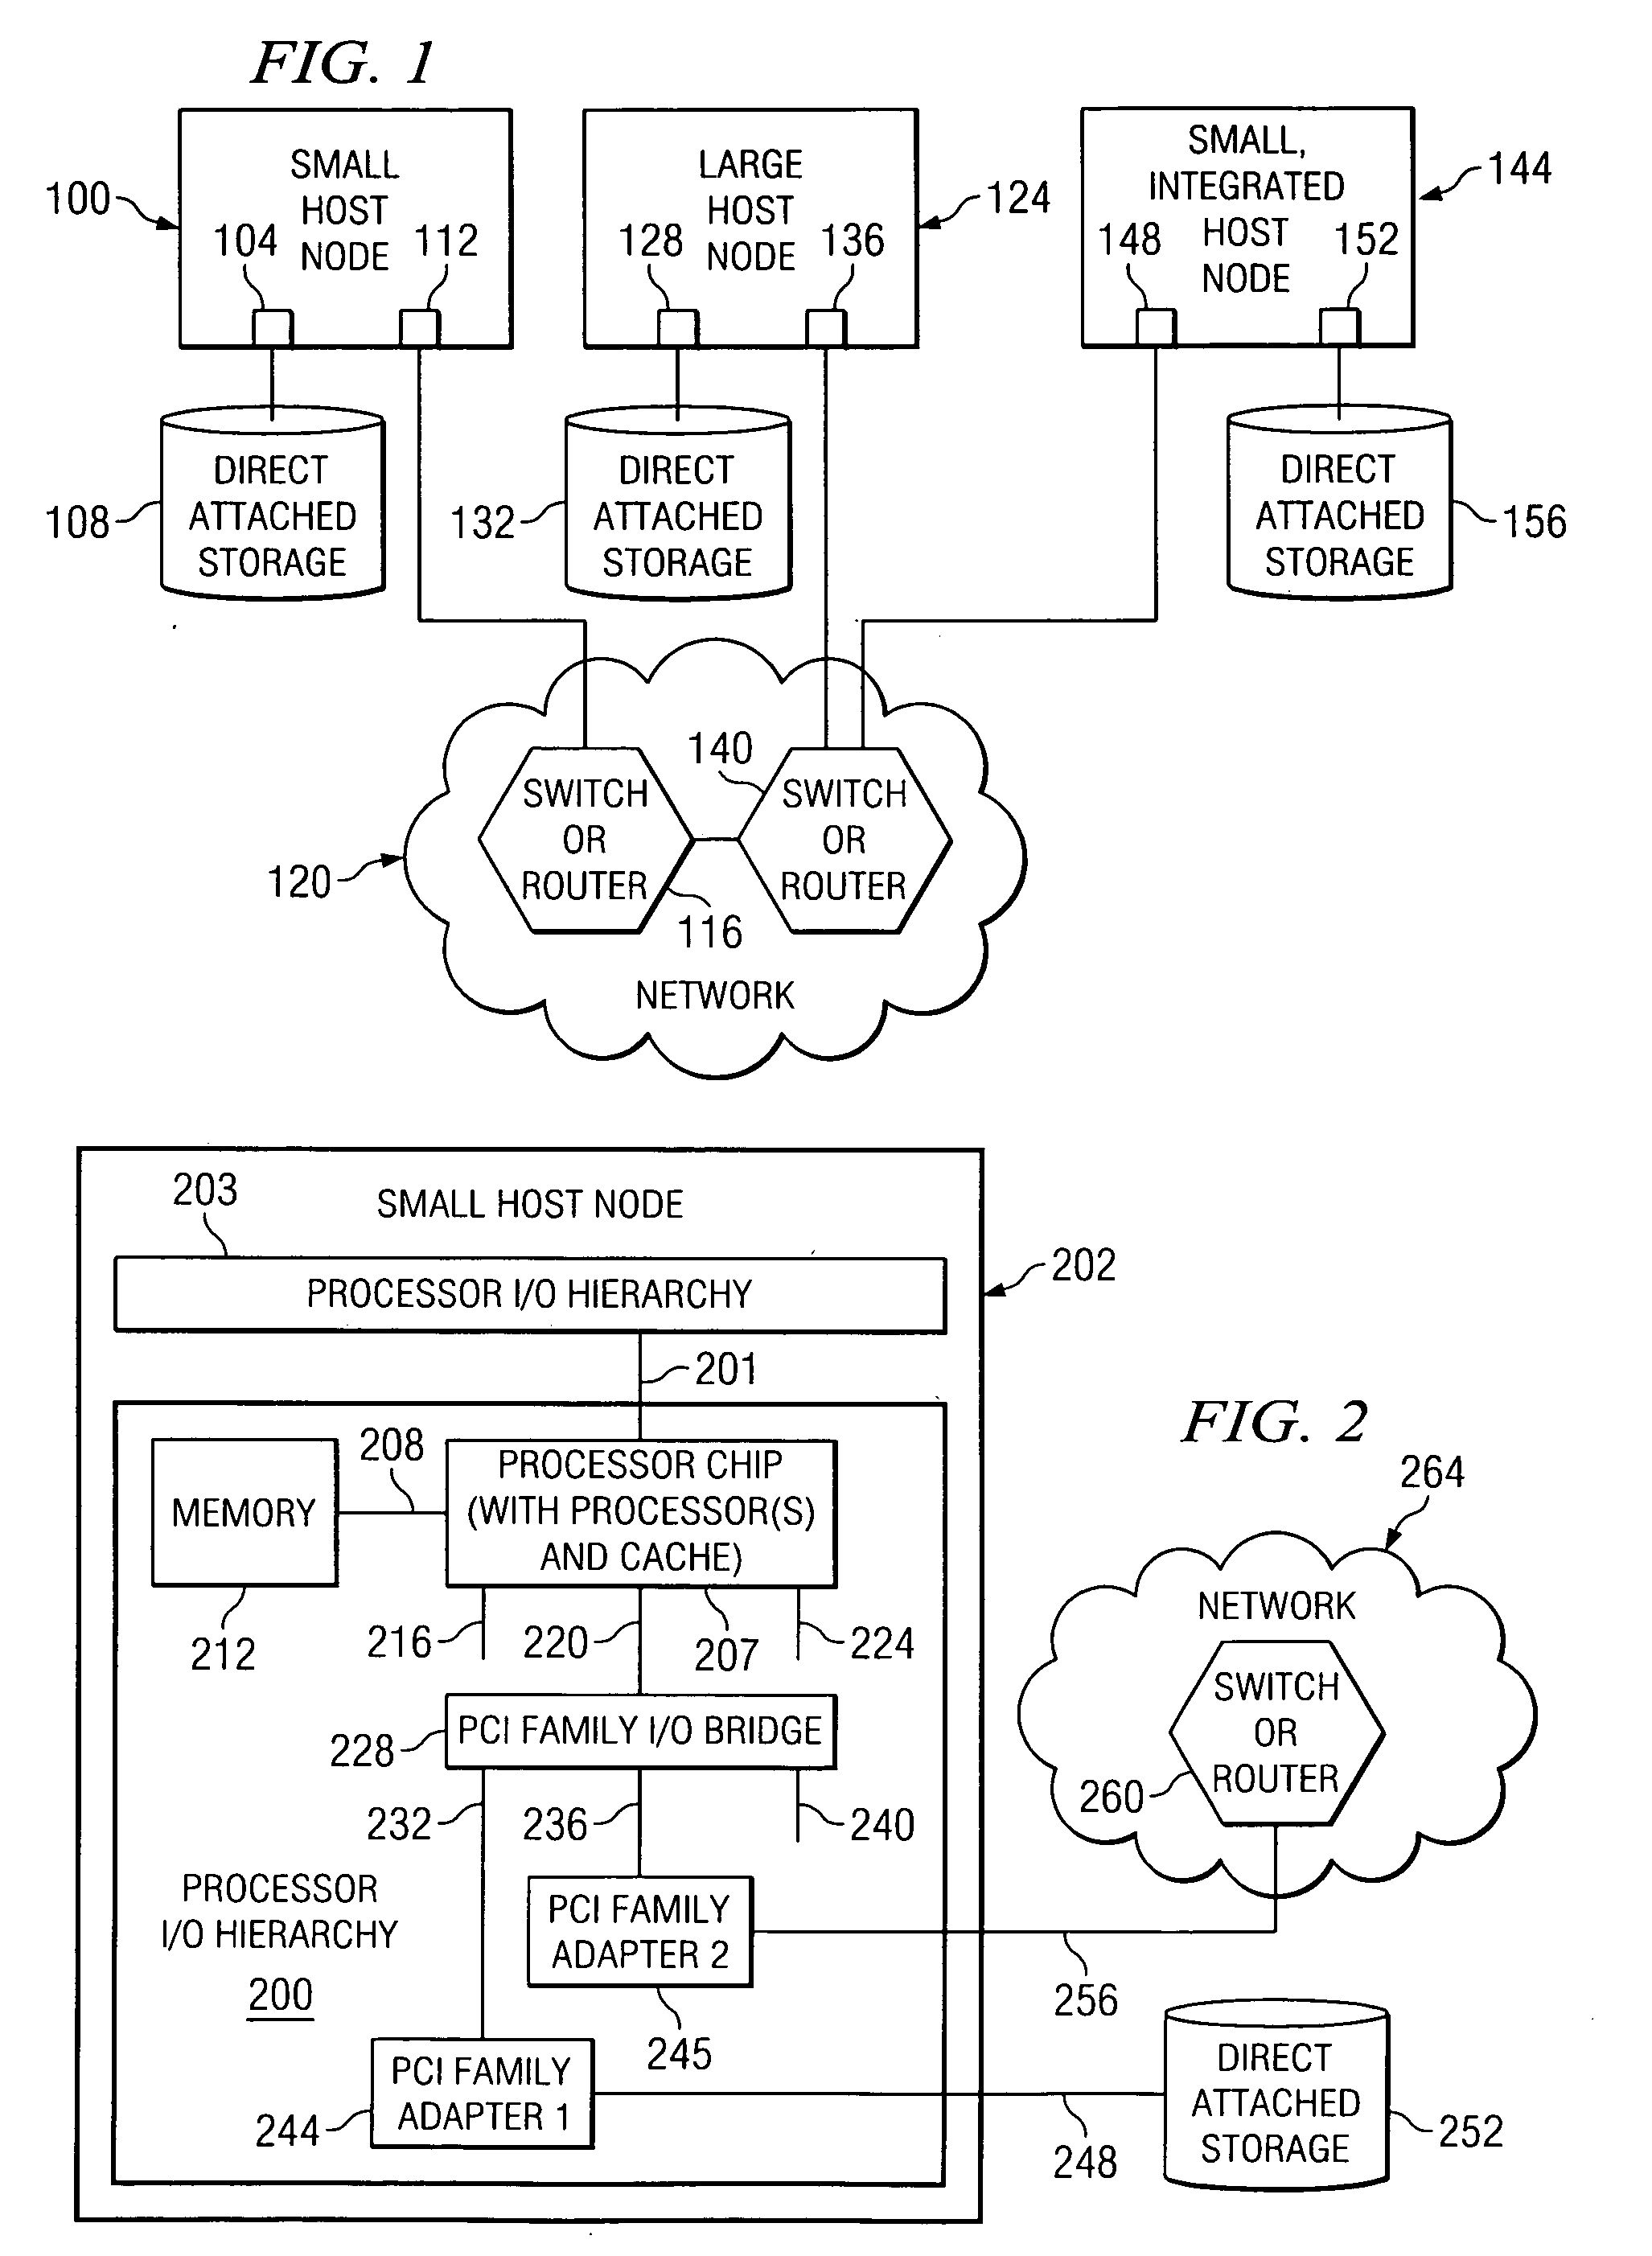 System and method for virtual resource initialization on a physical adapter that supports virtual resources